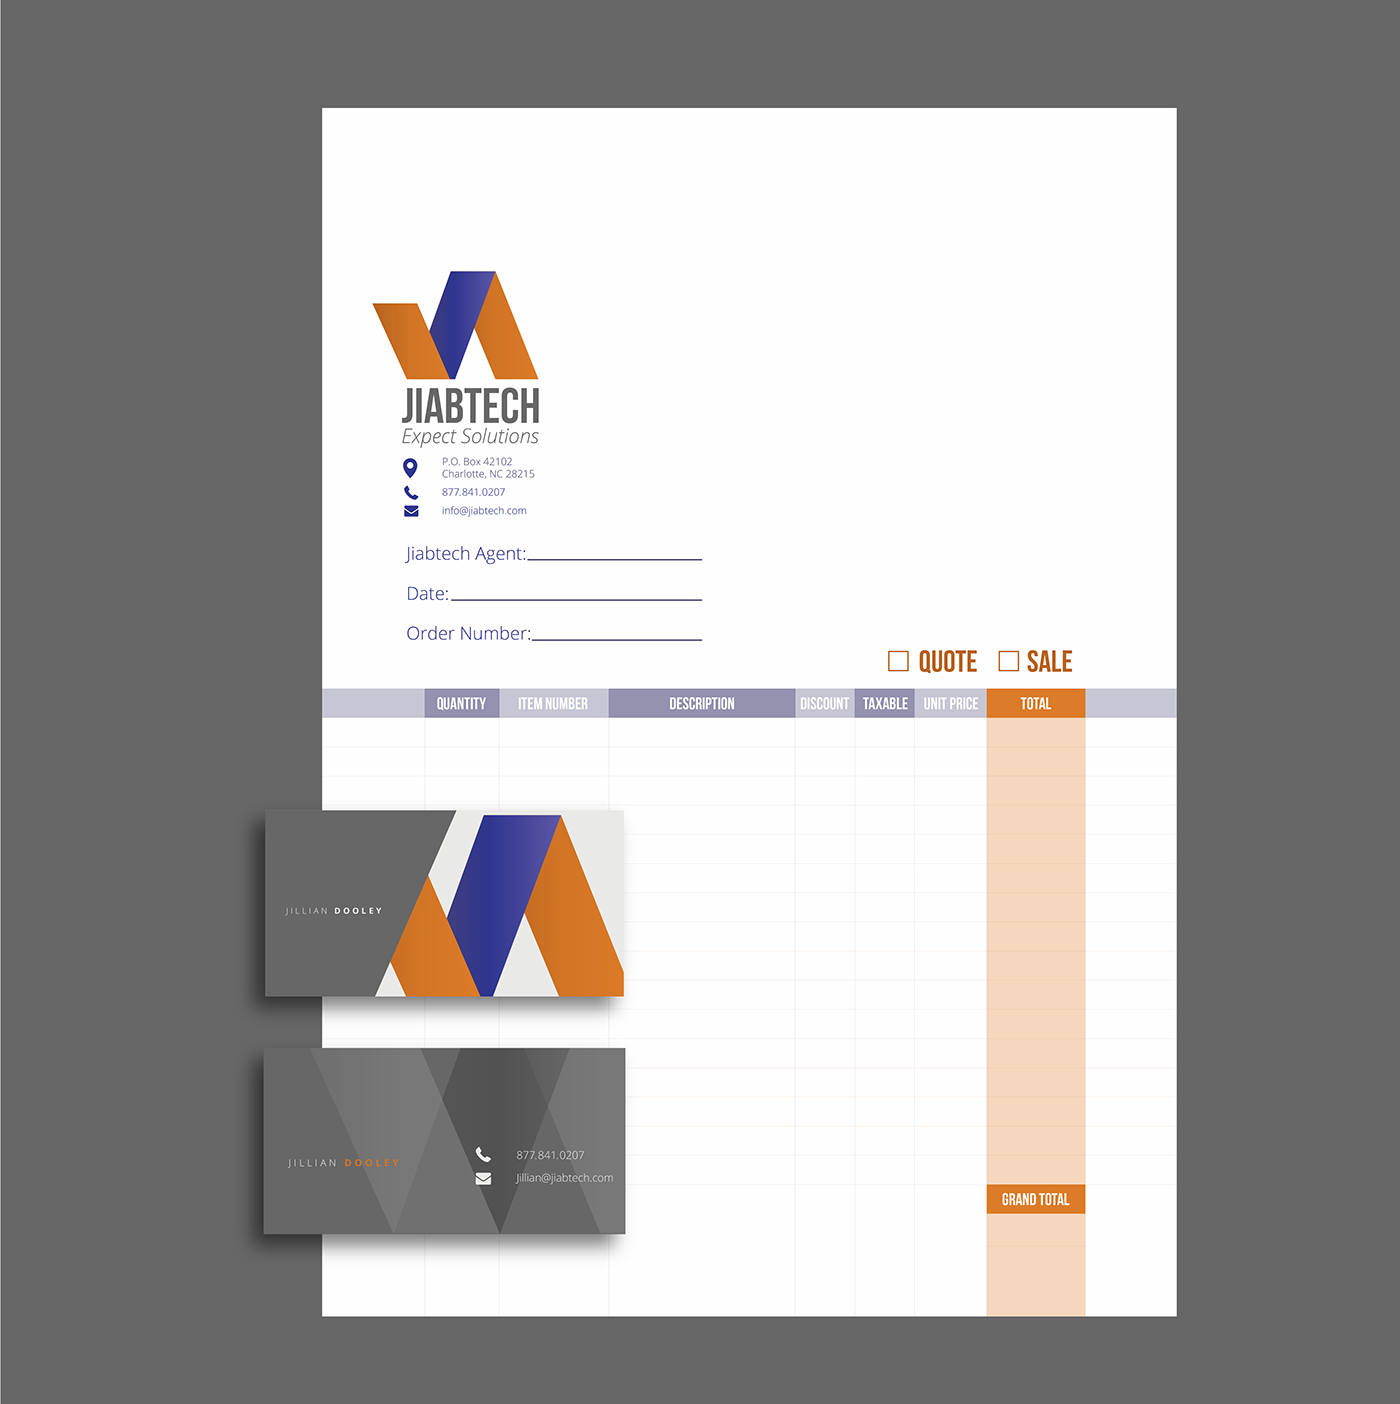 industrial brand identity corporate brand package Business Cards invoice web page live